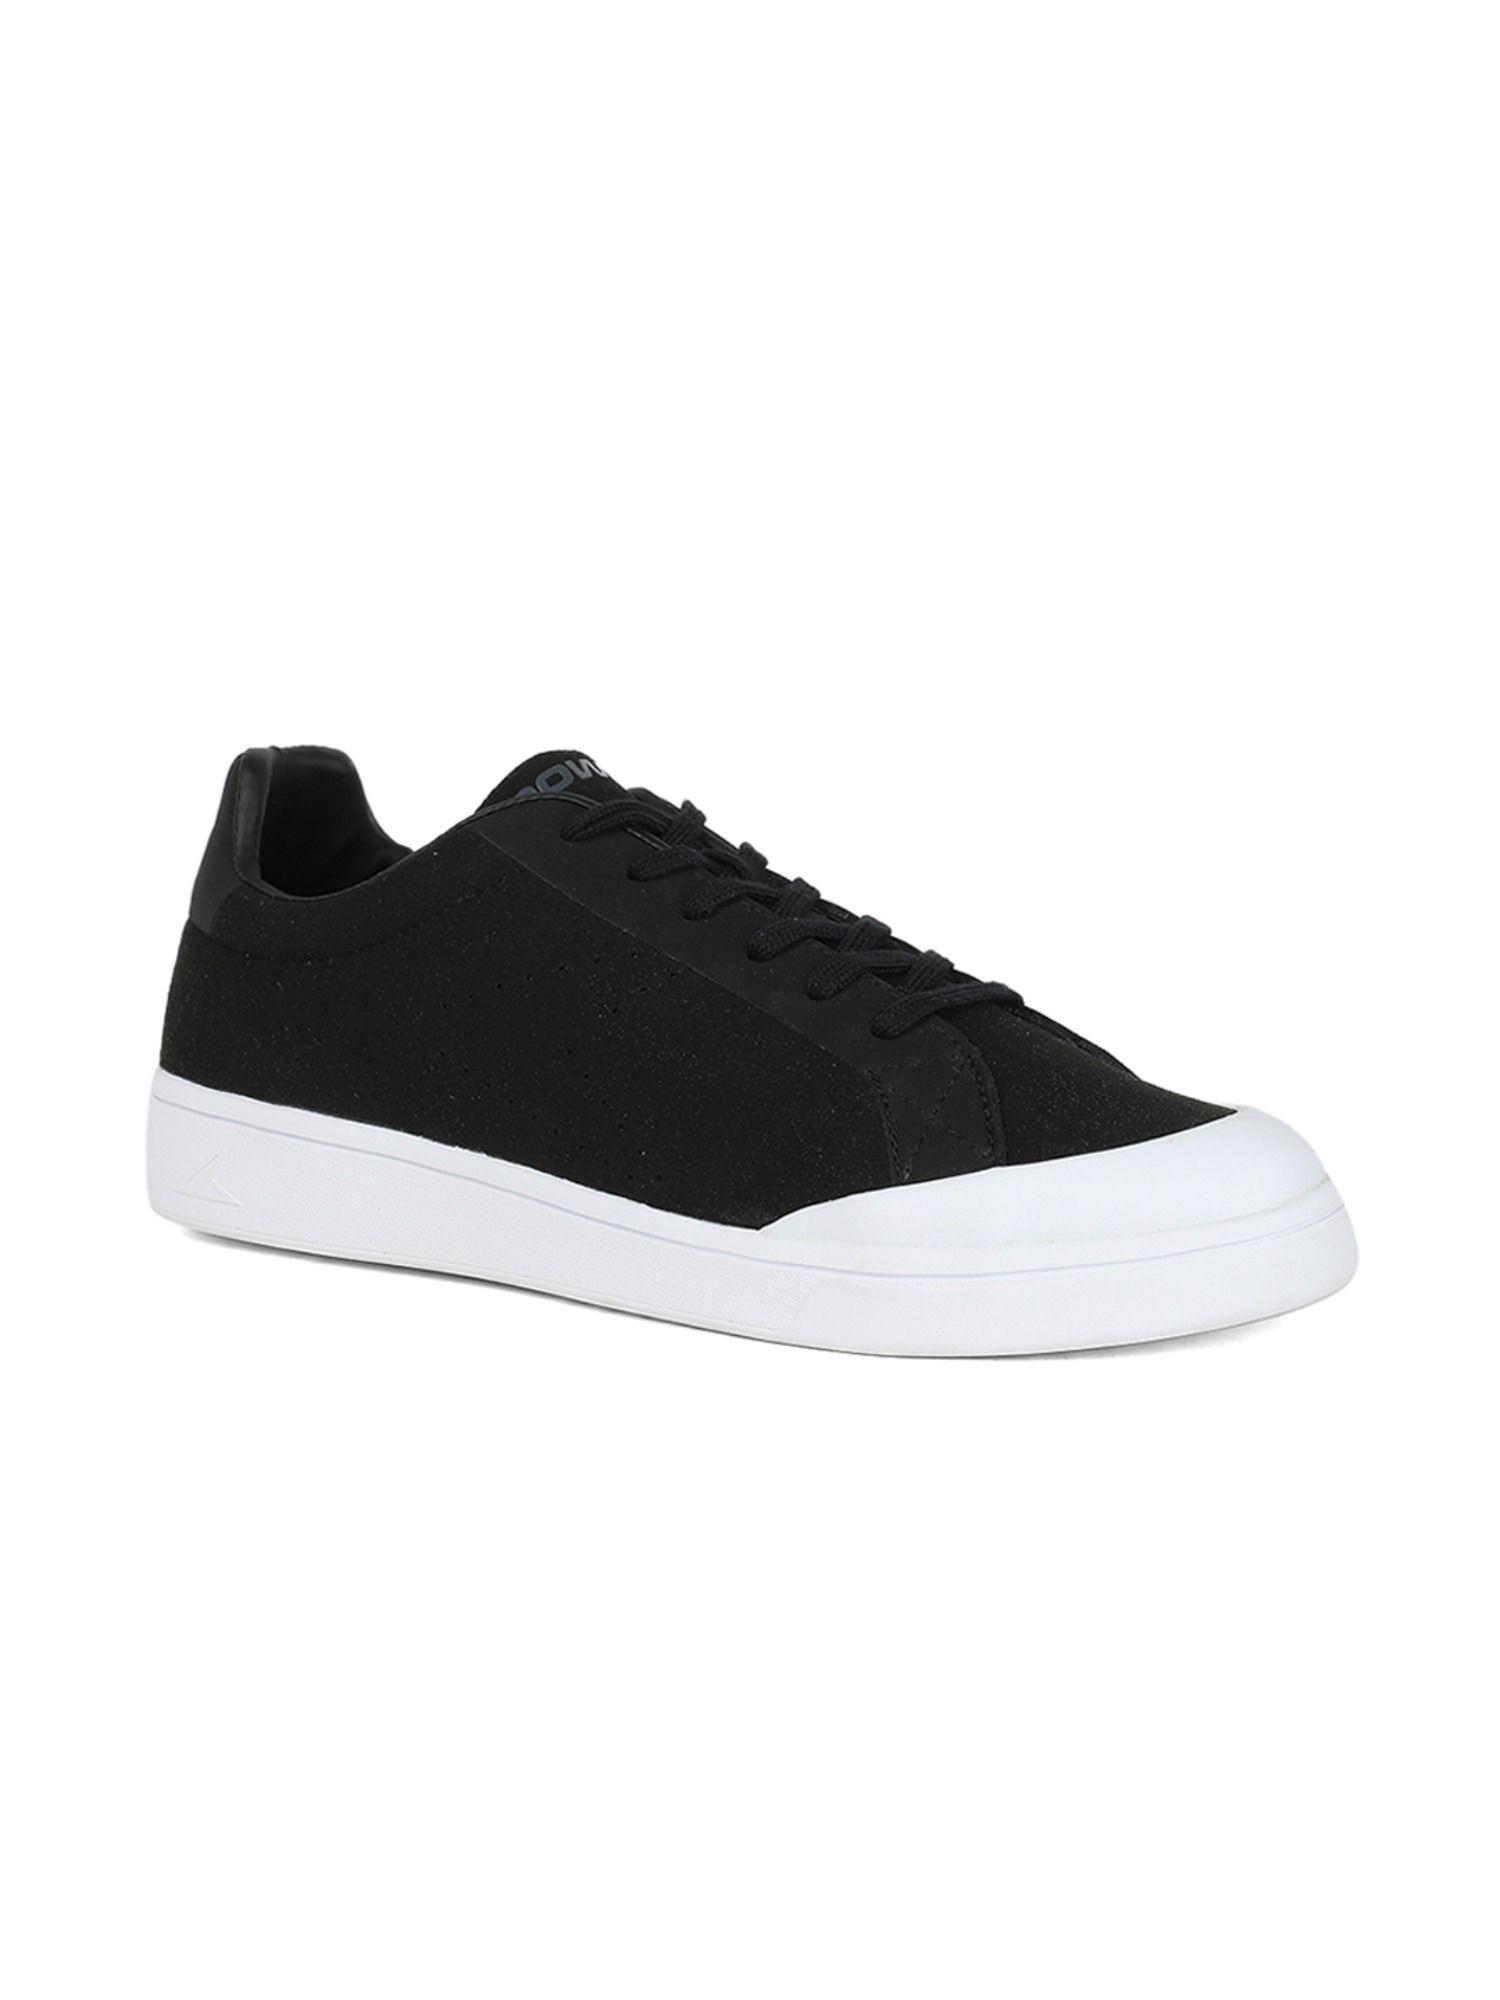 black casual shoes for men